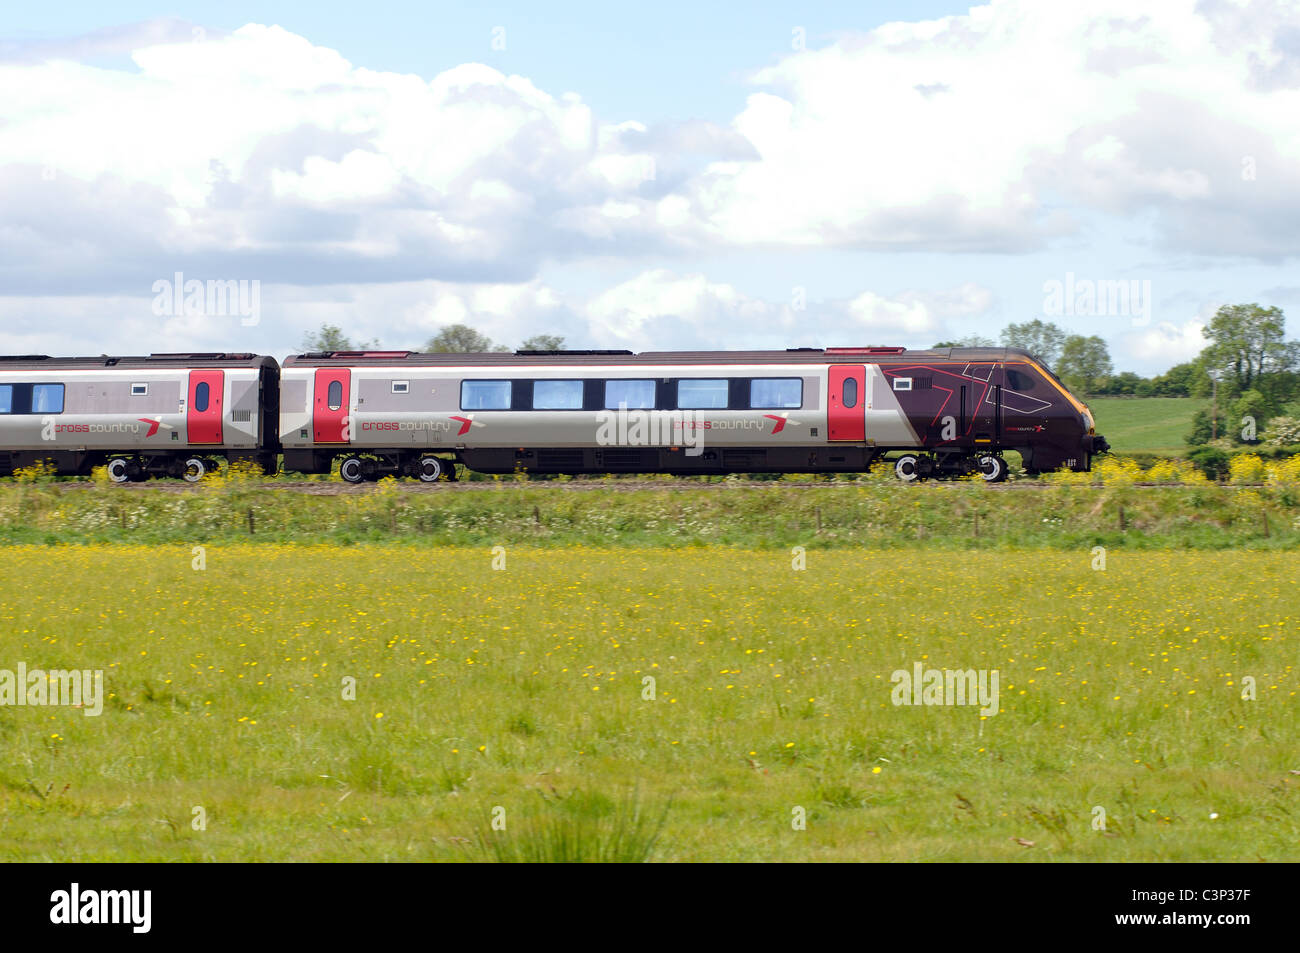 Arriva Cross Country Voyager train Stock Photo